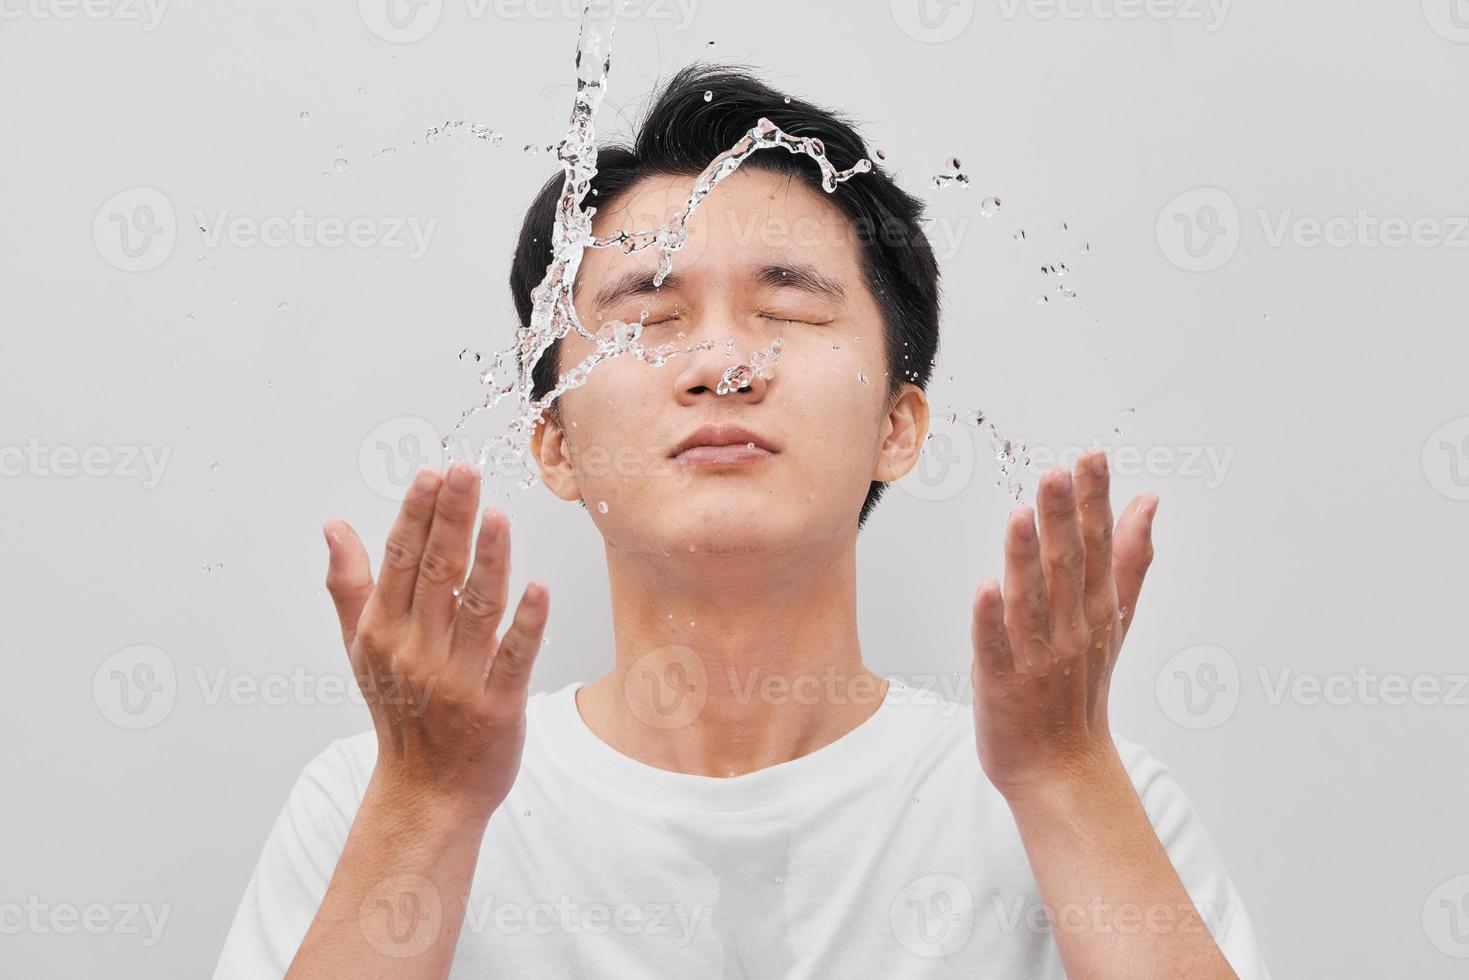 Young man spraying water on his face over gray background photo